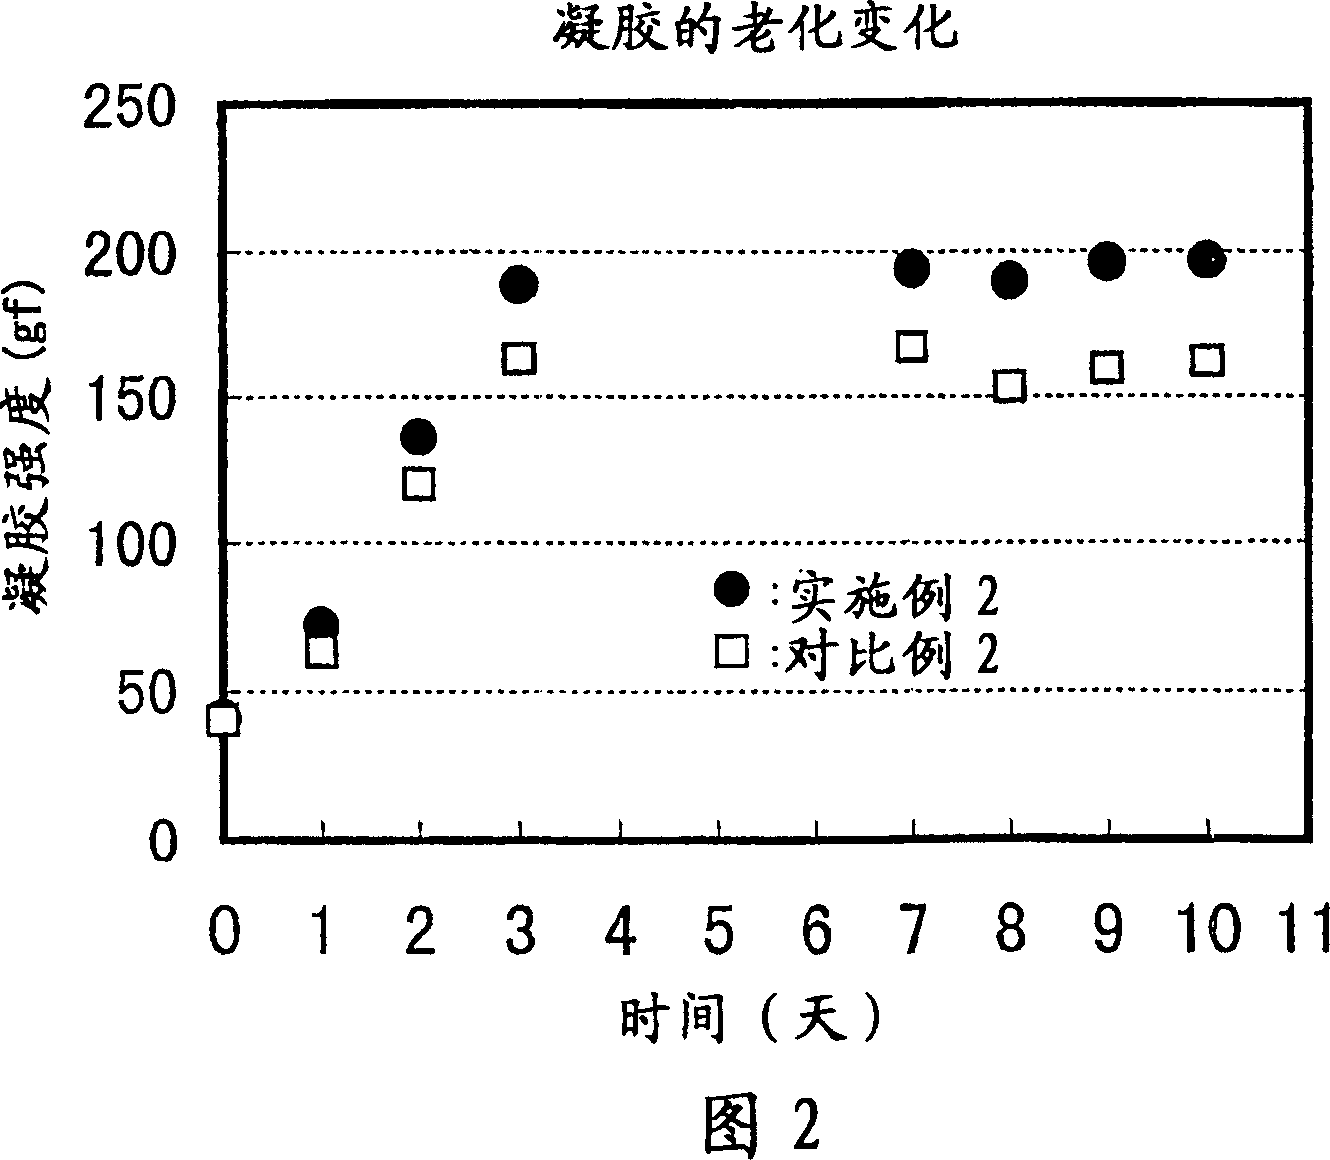 Adhesive for dermal patch and production process thereof